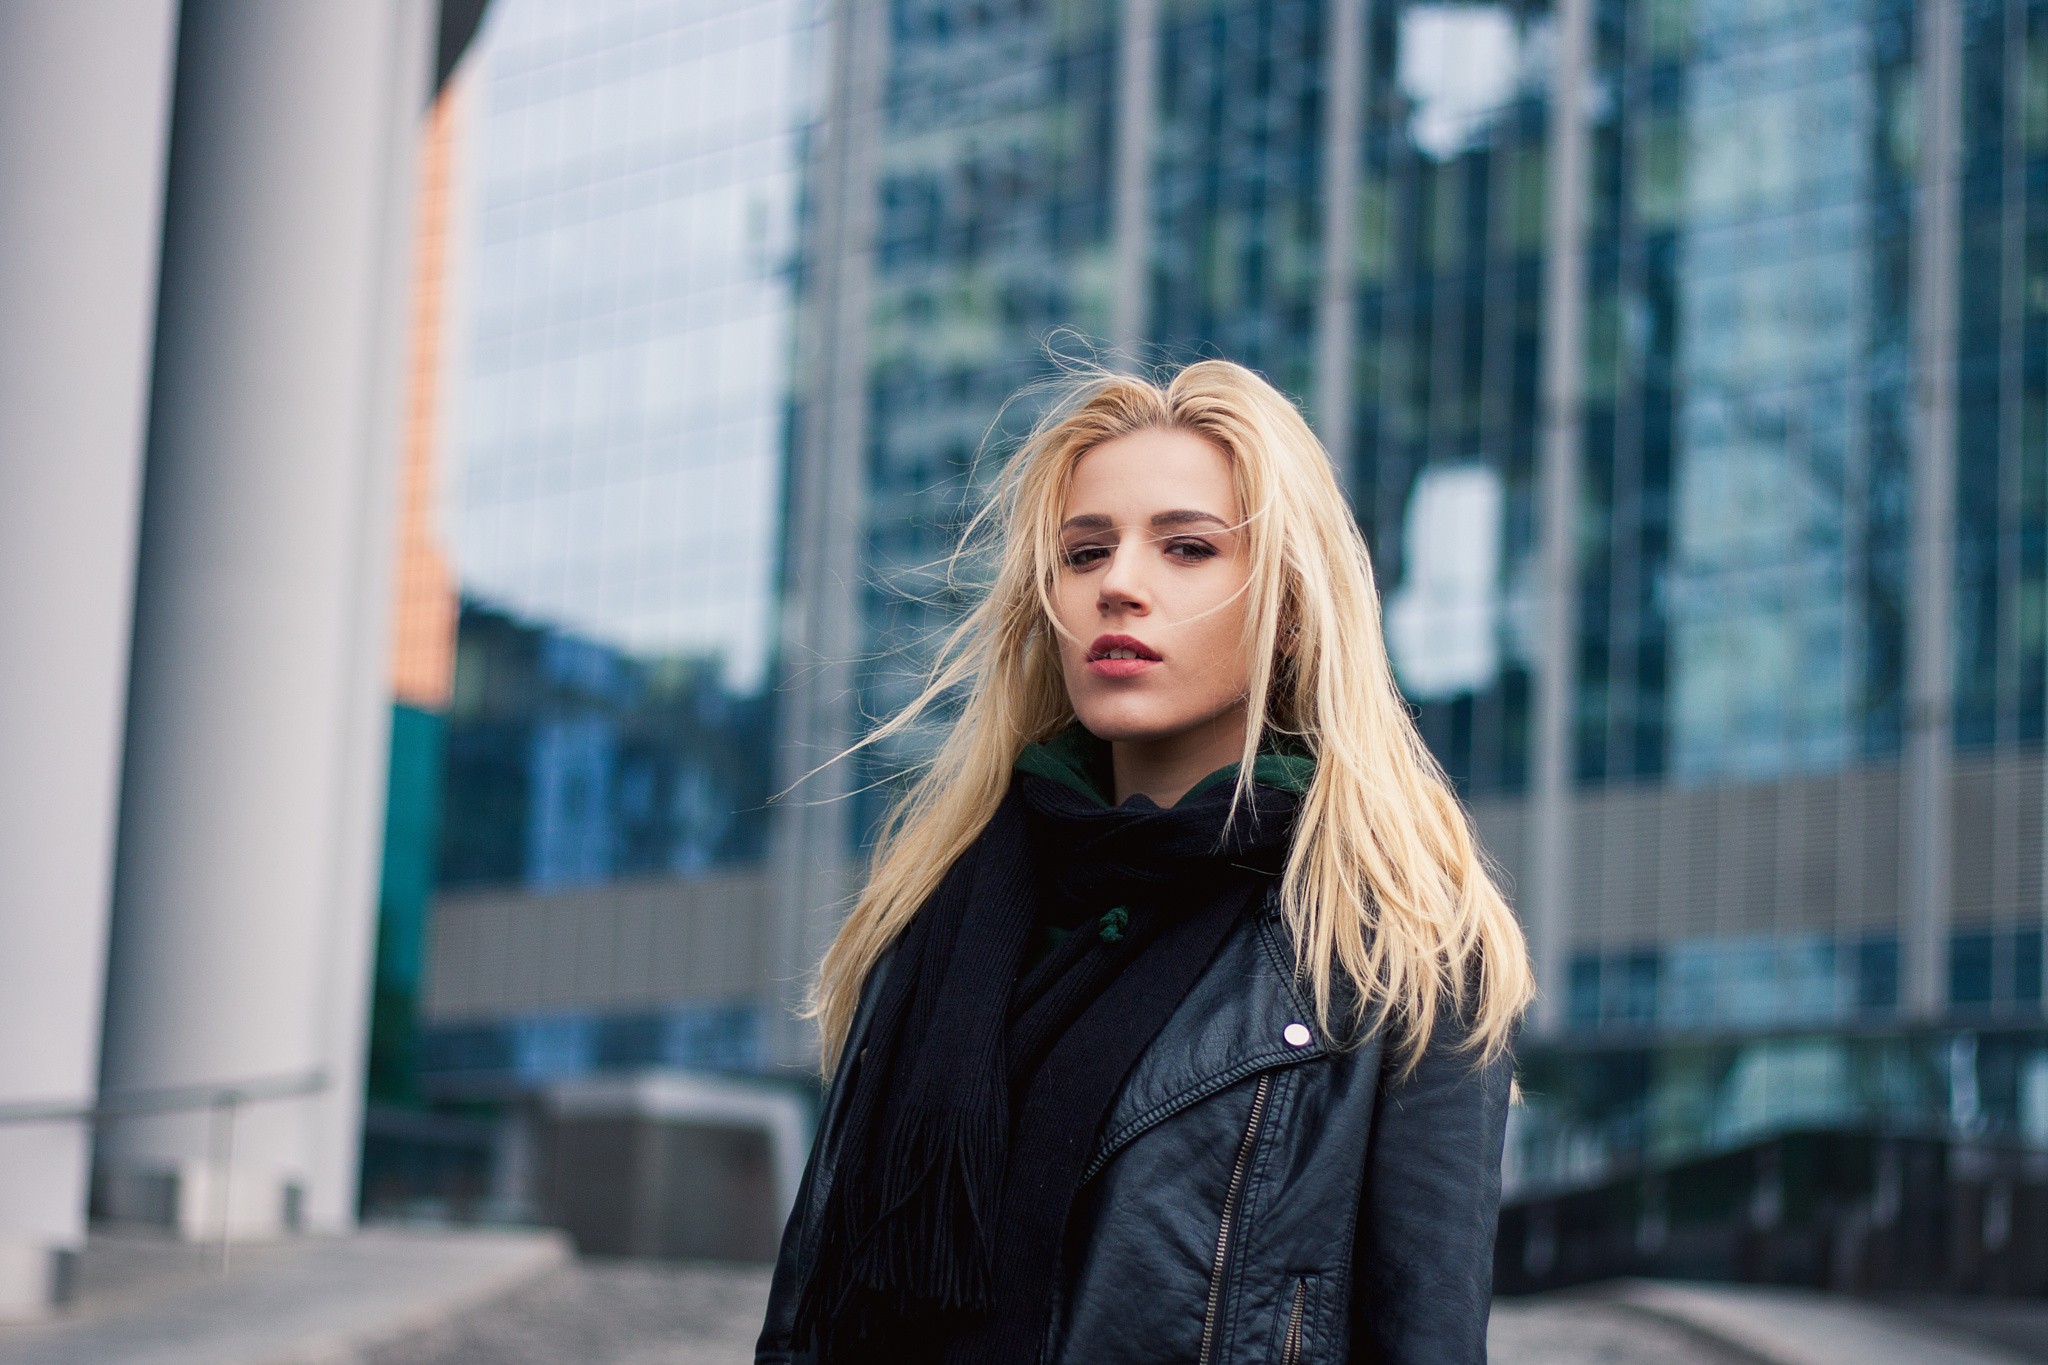 People 2048x1365 women blonde windy scarf looking at viewer women outdoors leather jacket black jackets hair in face black scarf Martin Kühn jacket urban parted lips city